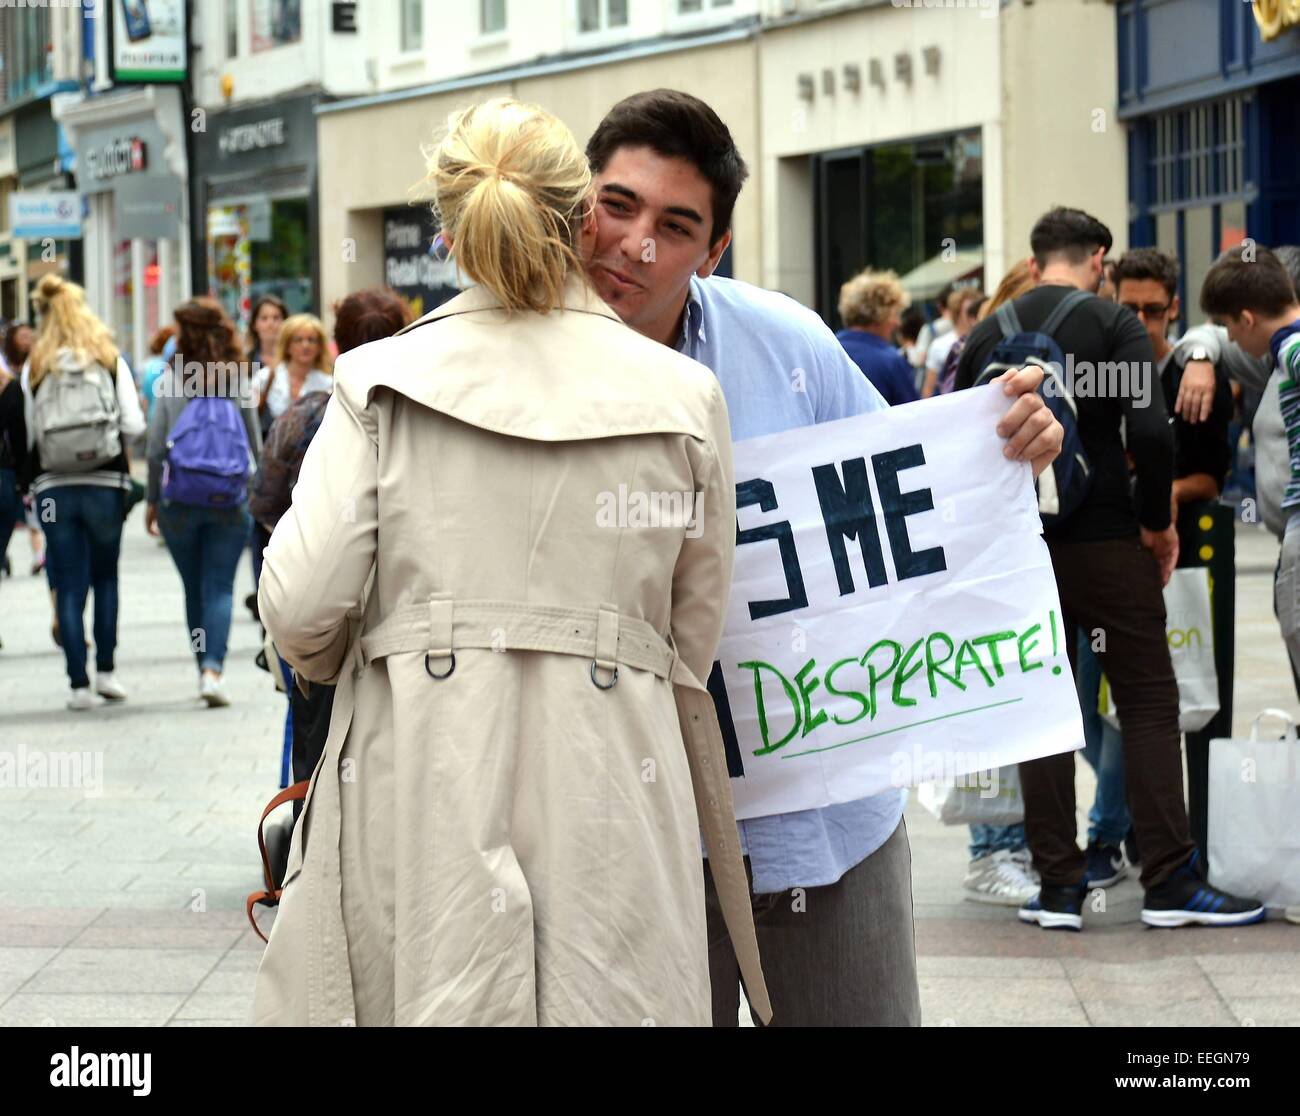 Argentinean You Tube prankster & personality Santiago Cattaneo stands on Grafton Street with a sign Kiss Me I'm Desperate! while being secretly filmed by a friend nearby for one of his online viral videos  Featuring: Santiago Cattaneo Where: Dublin, Ire Stock Photo